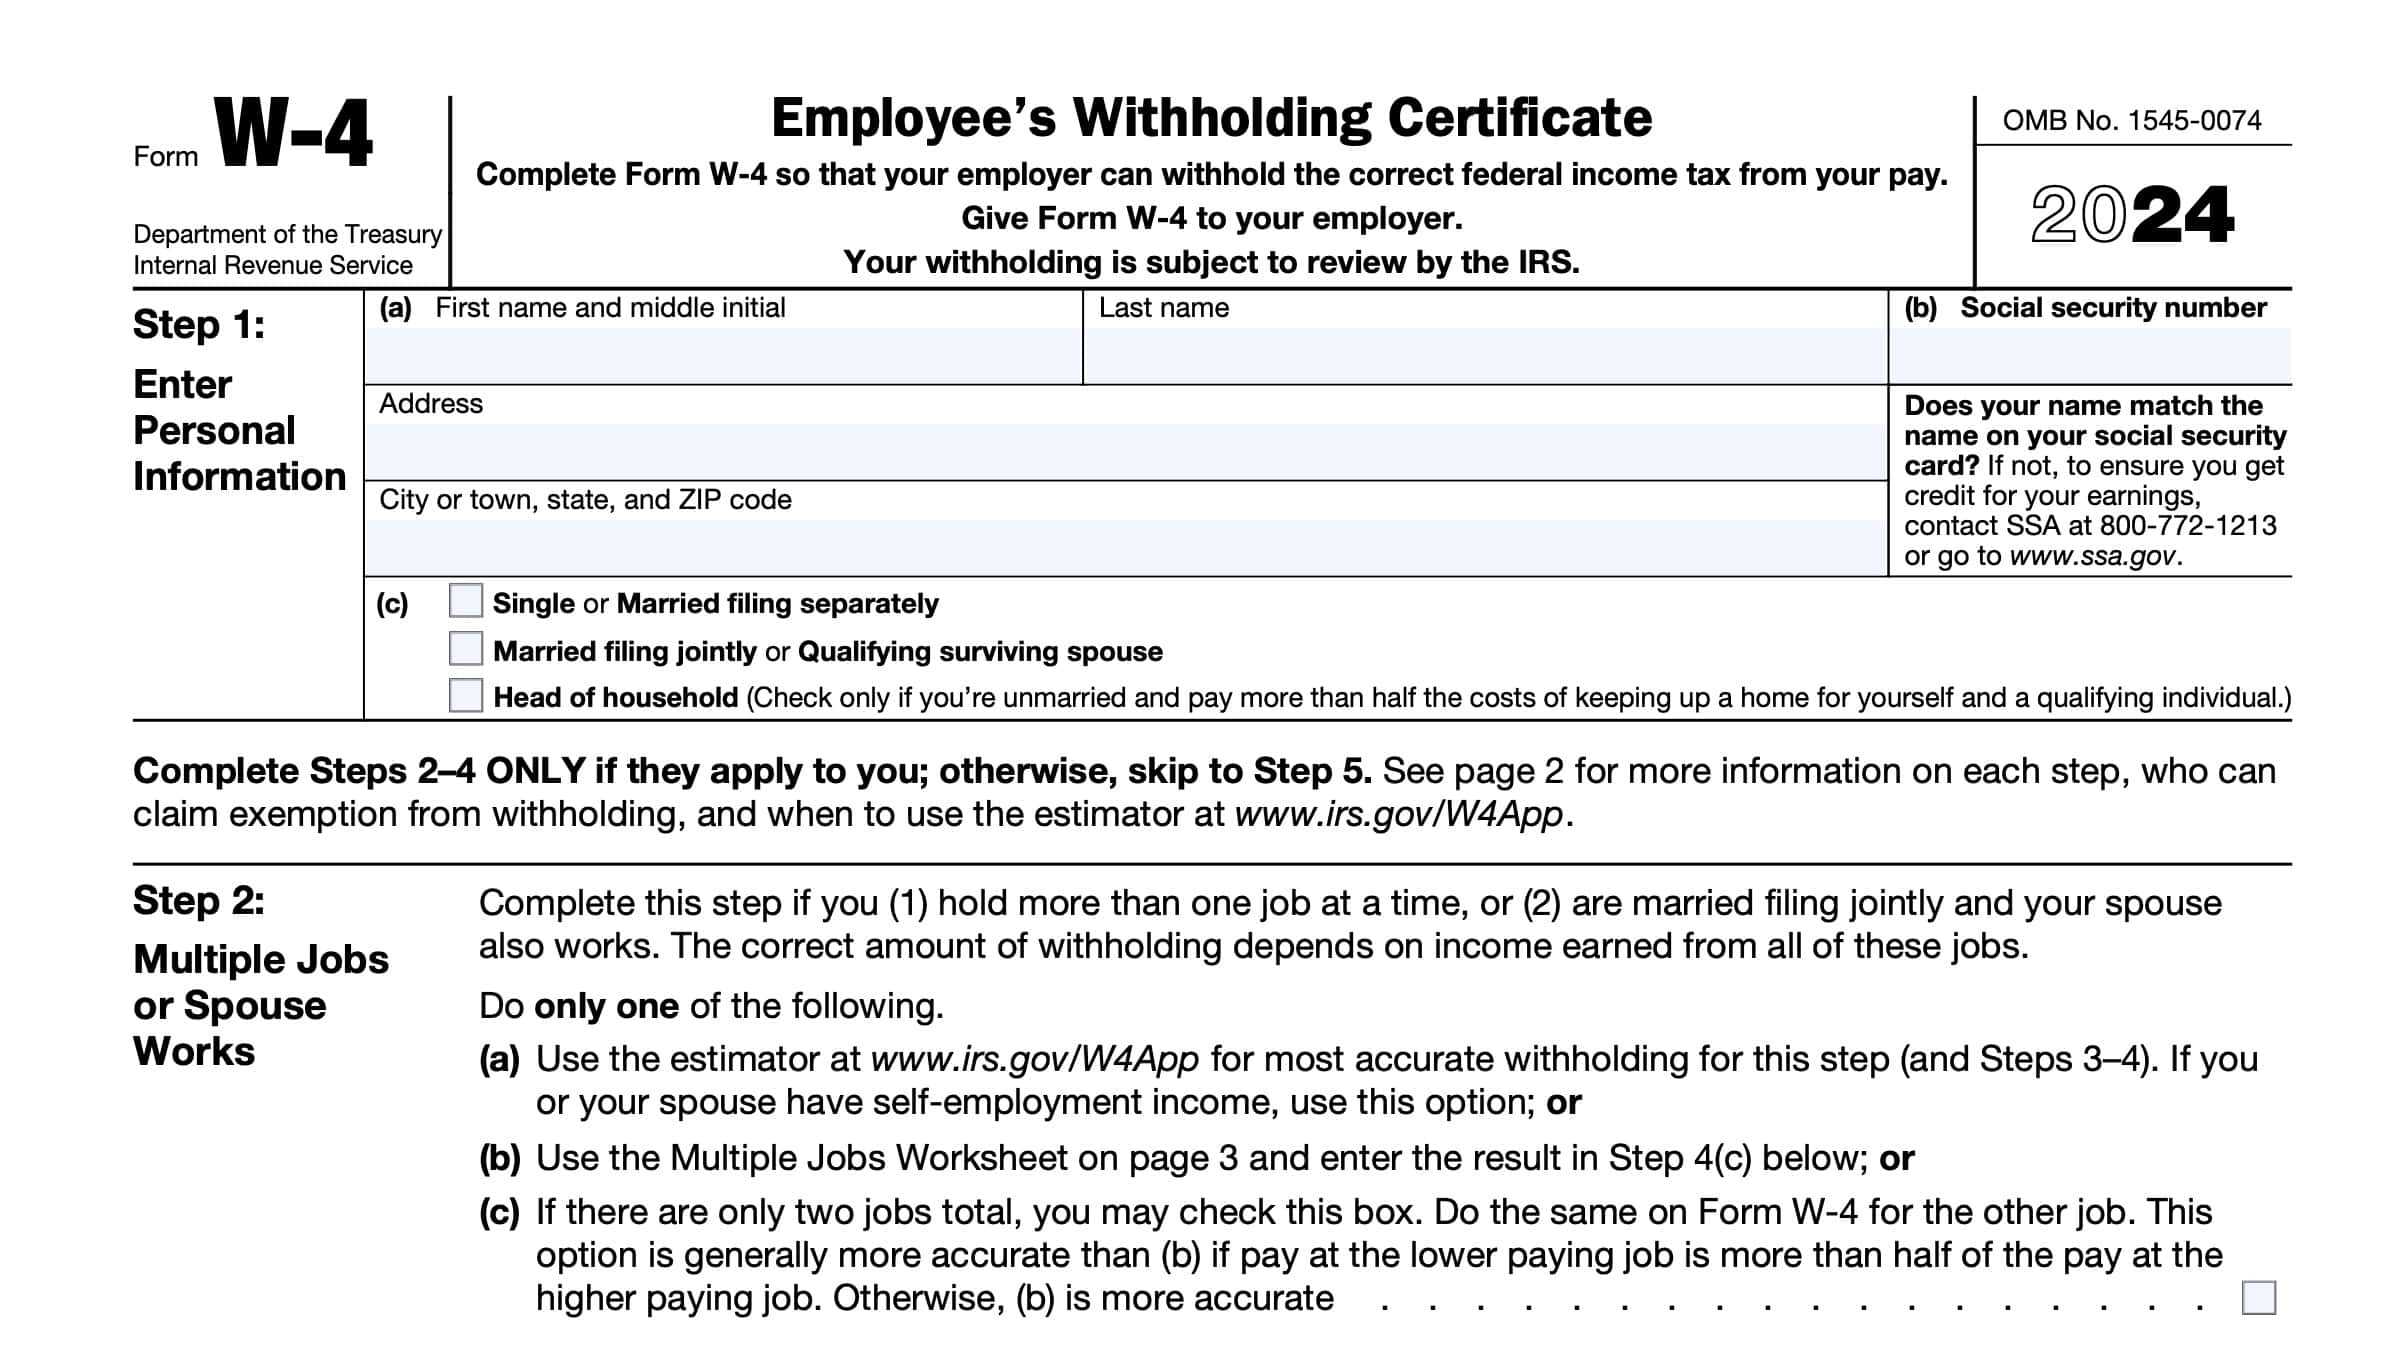 IRS Form W4 Instructions Employee's Withholding Certificate